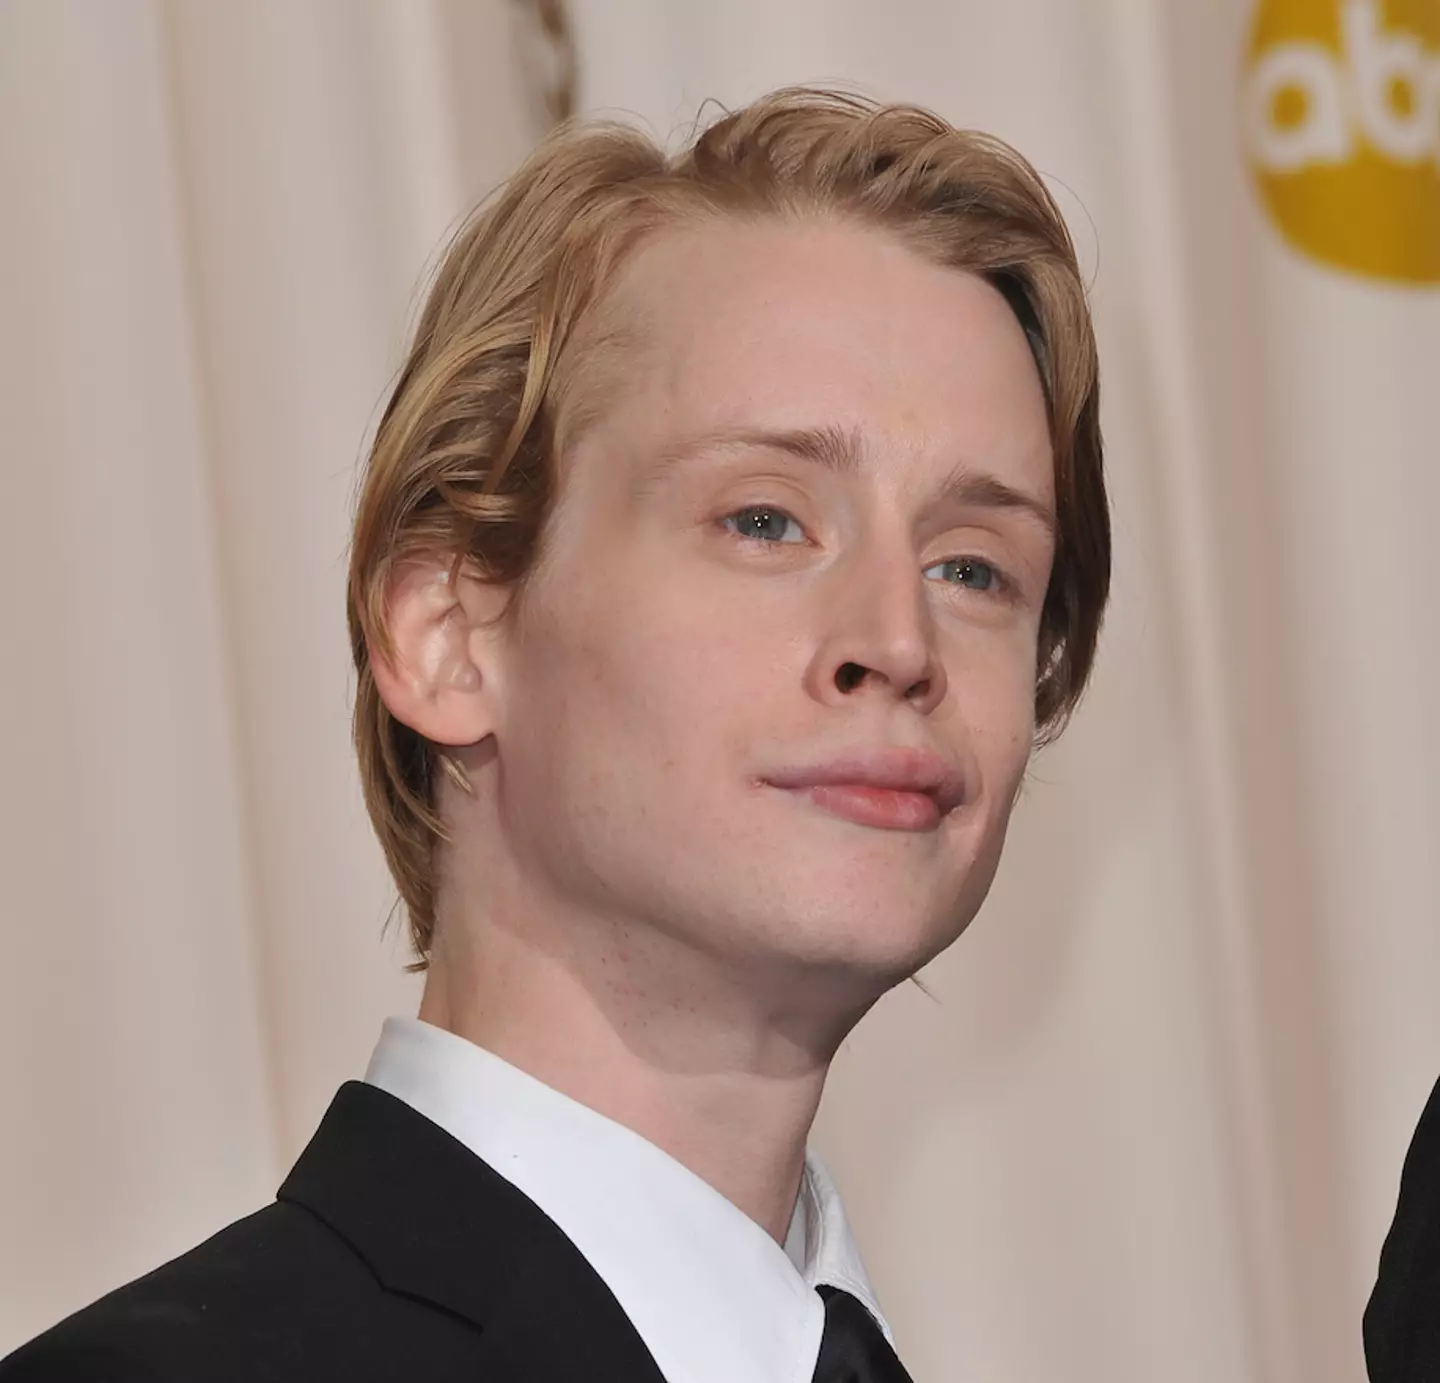 Fans are concerned Culkin was 'overworked'.